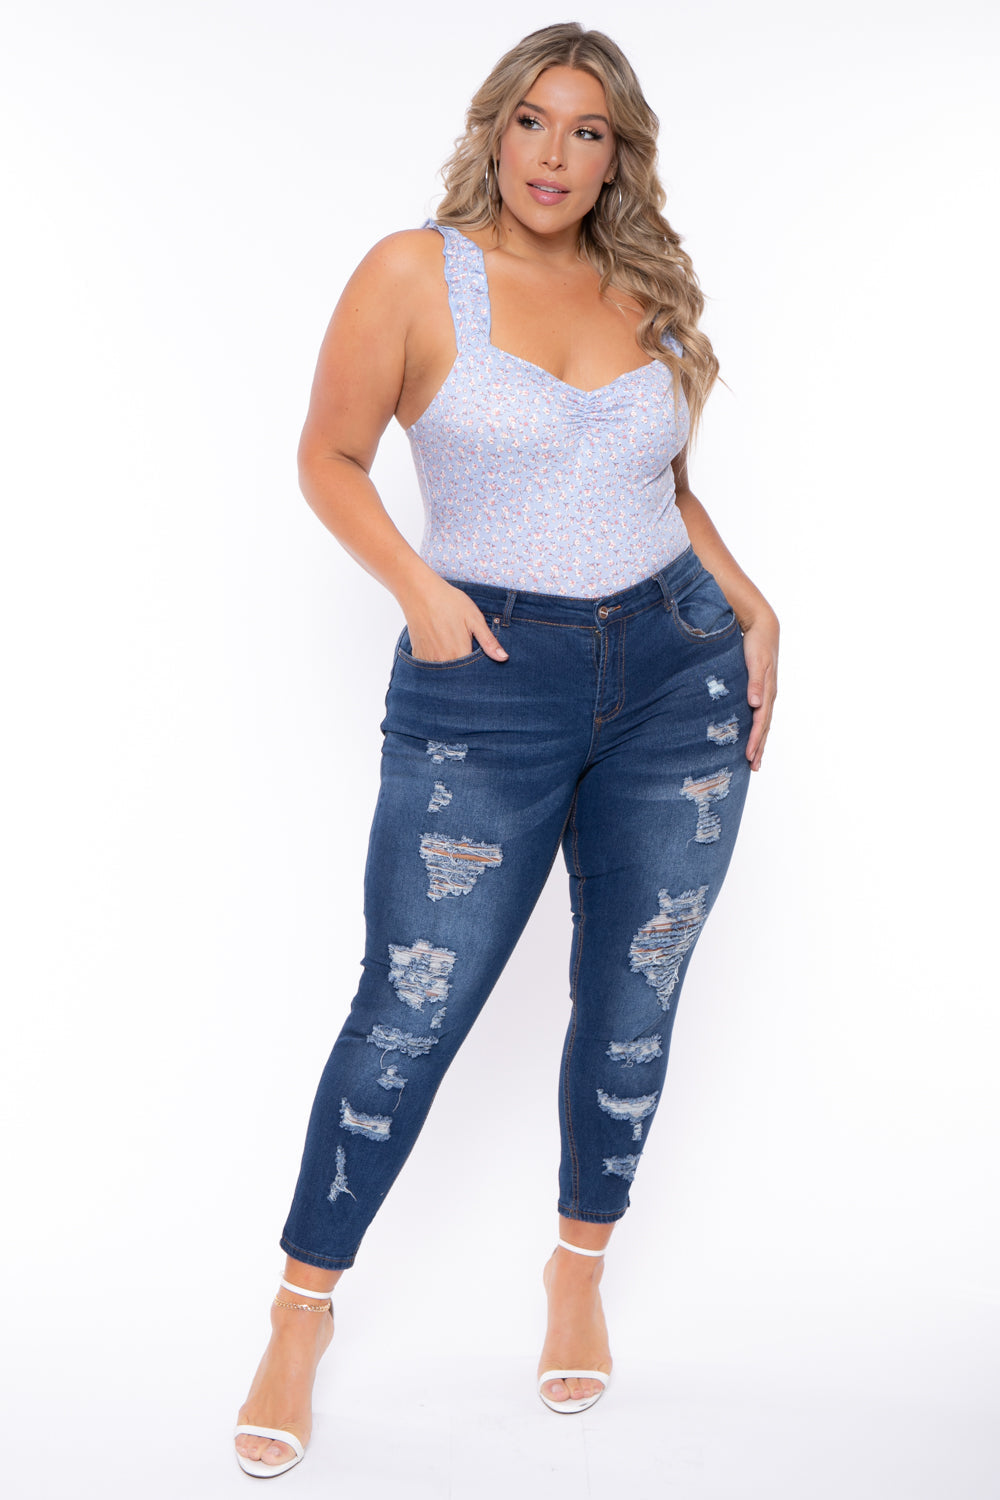 Doll House Bottoms Plus Size Tiana Distressed Jeans - Medium Wash